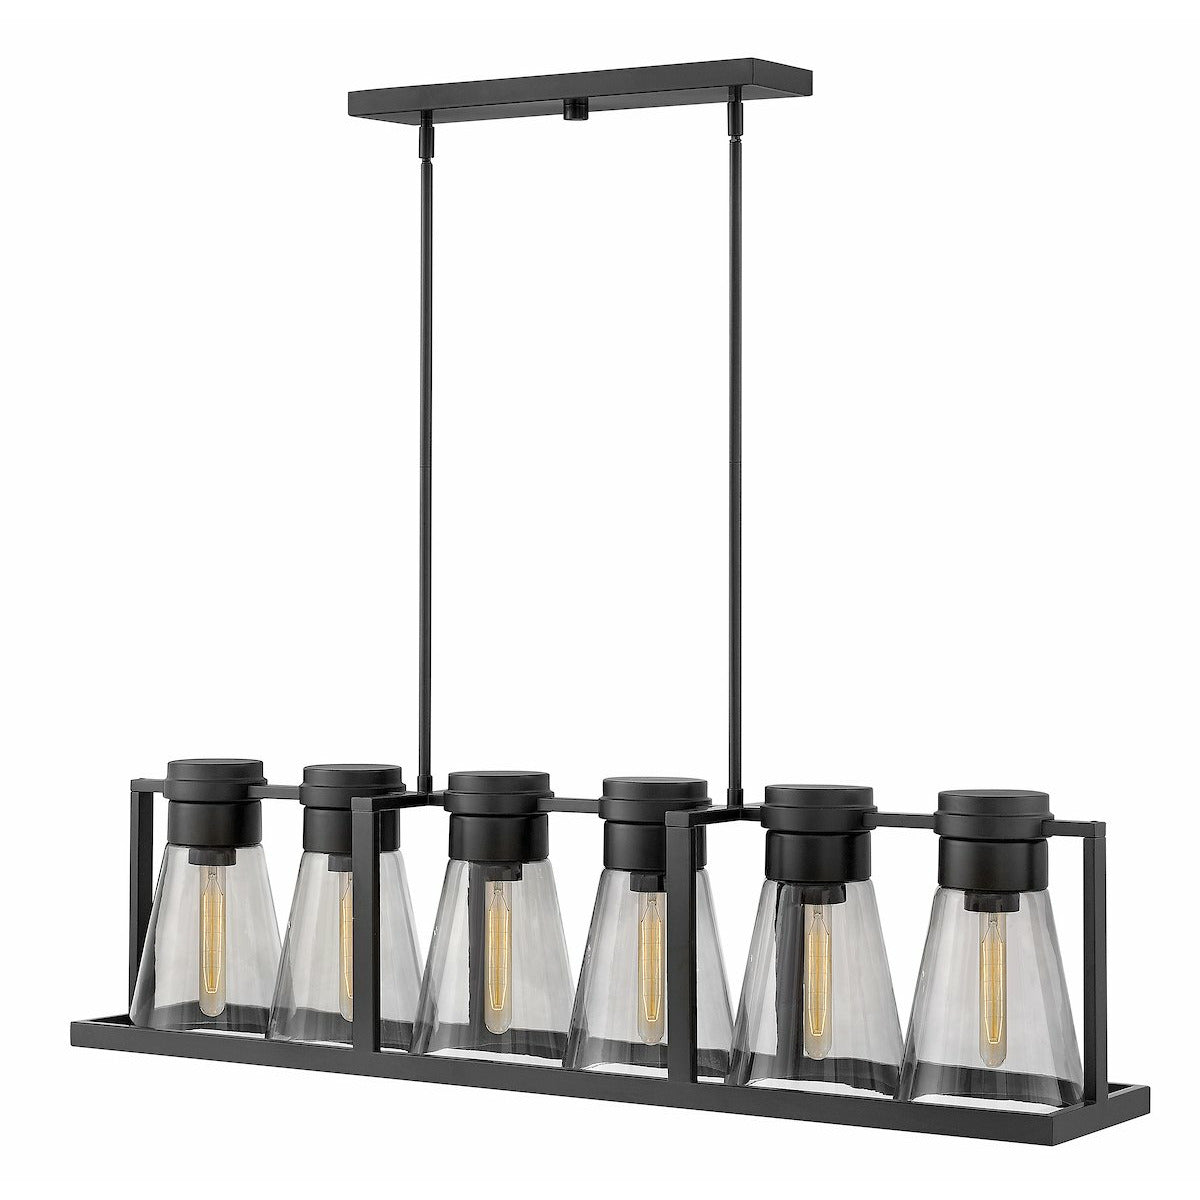 Refinery Linear Suspension Black with Smoked glass